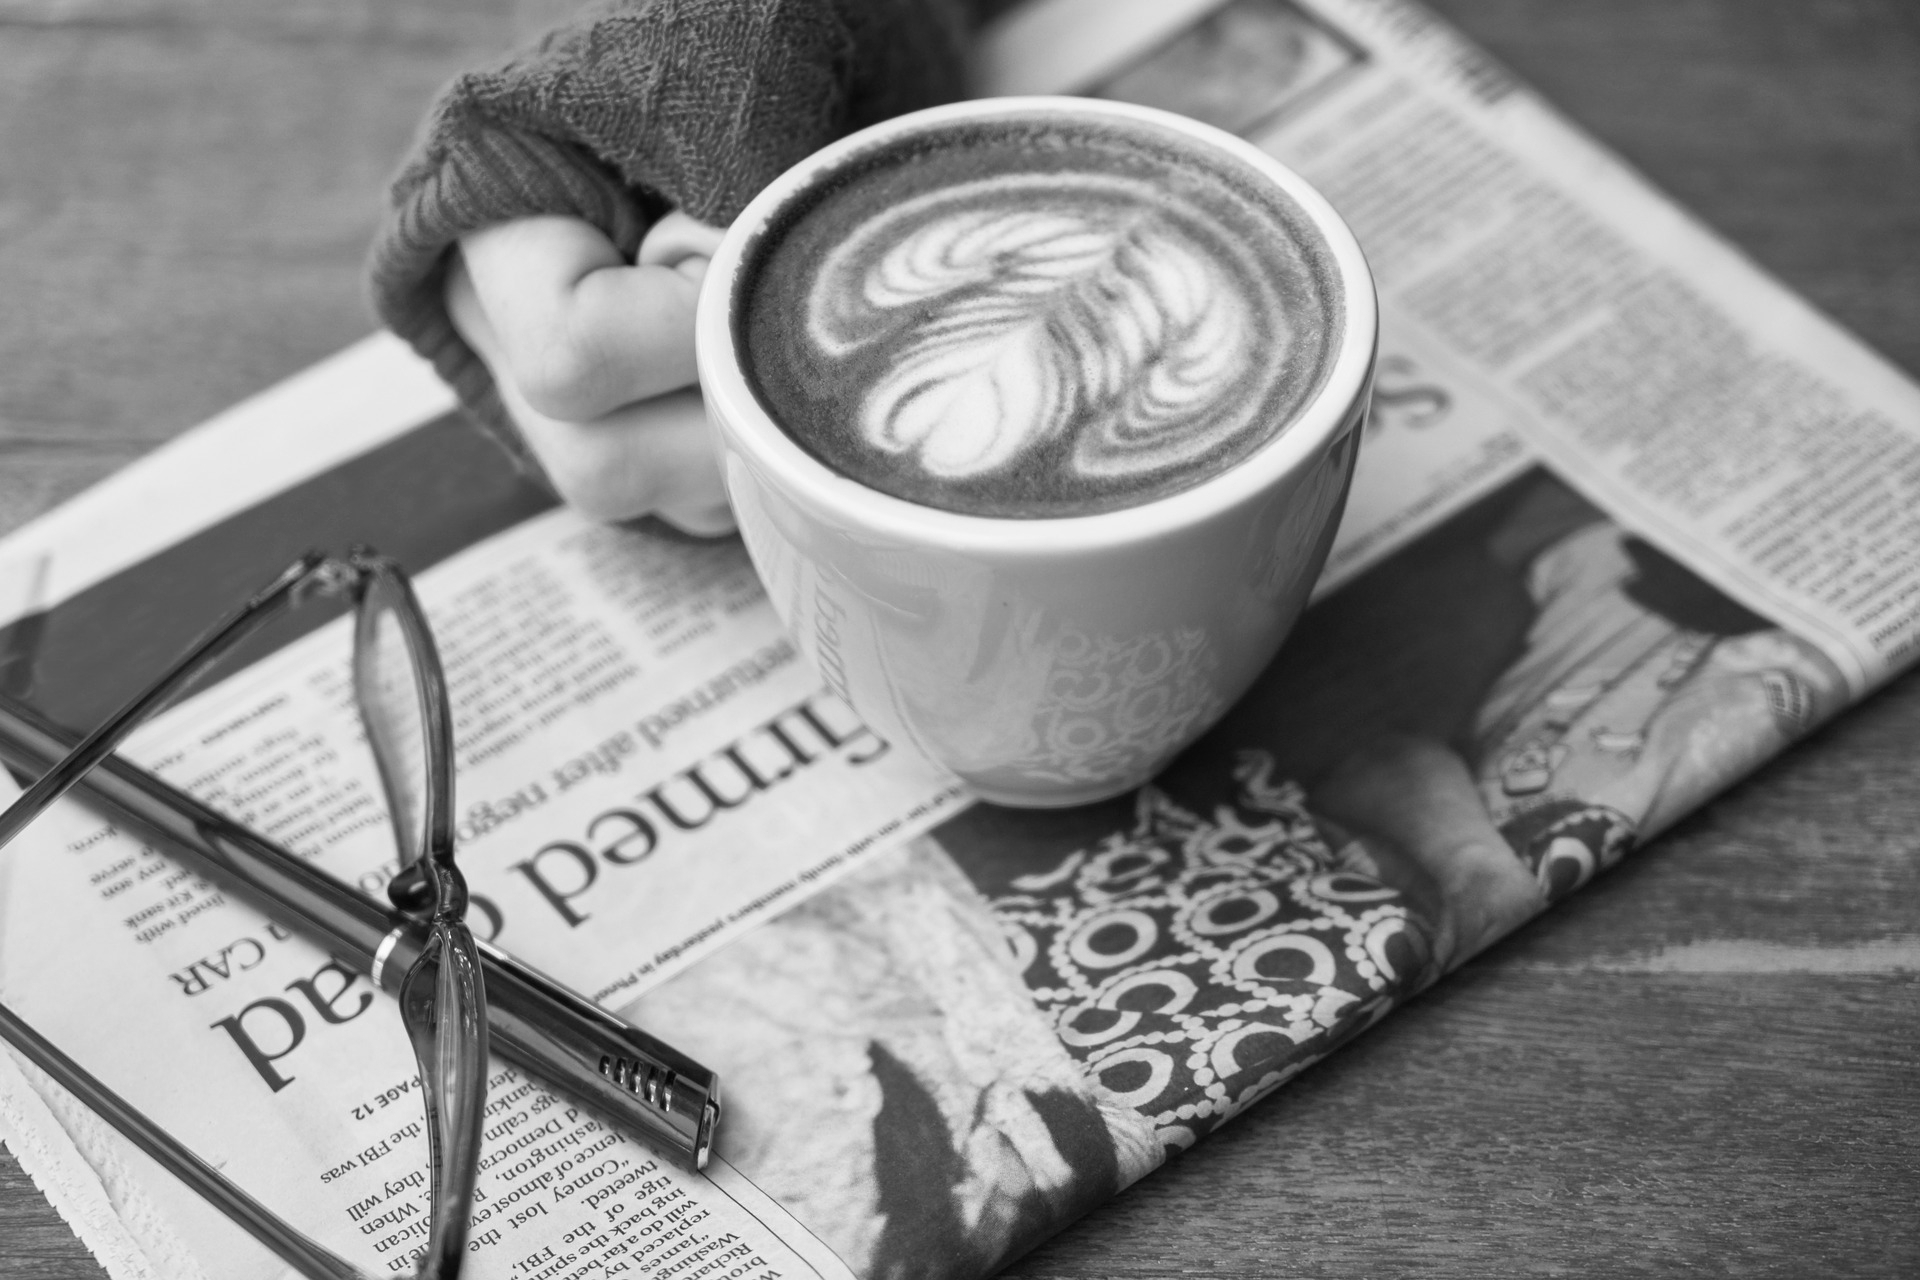 A hand holds a latte on top of a newspaper